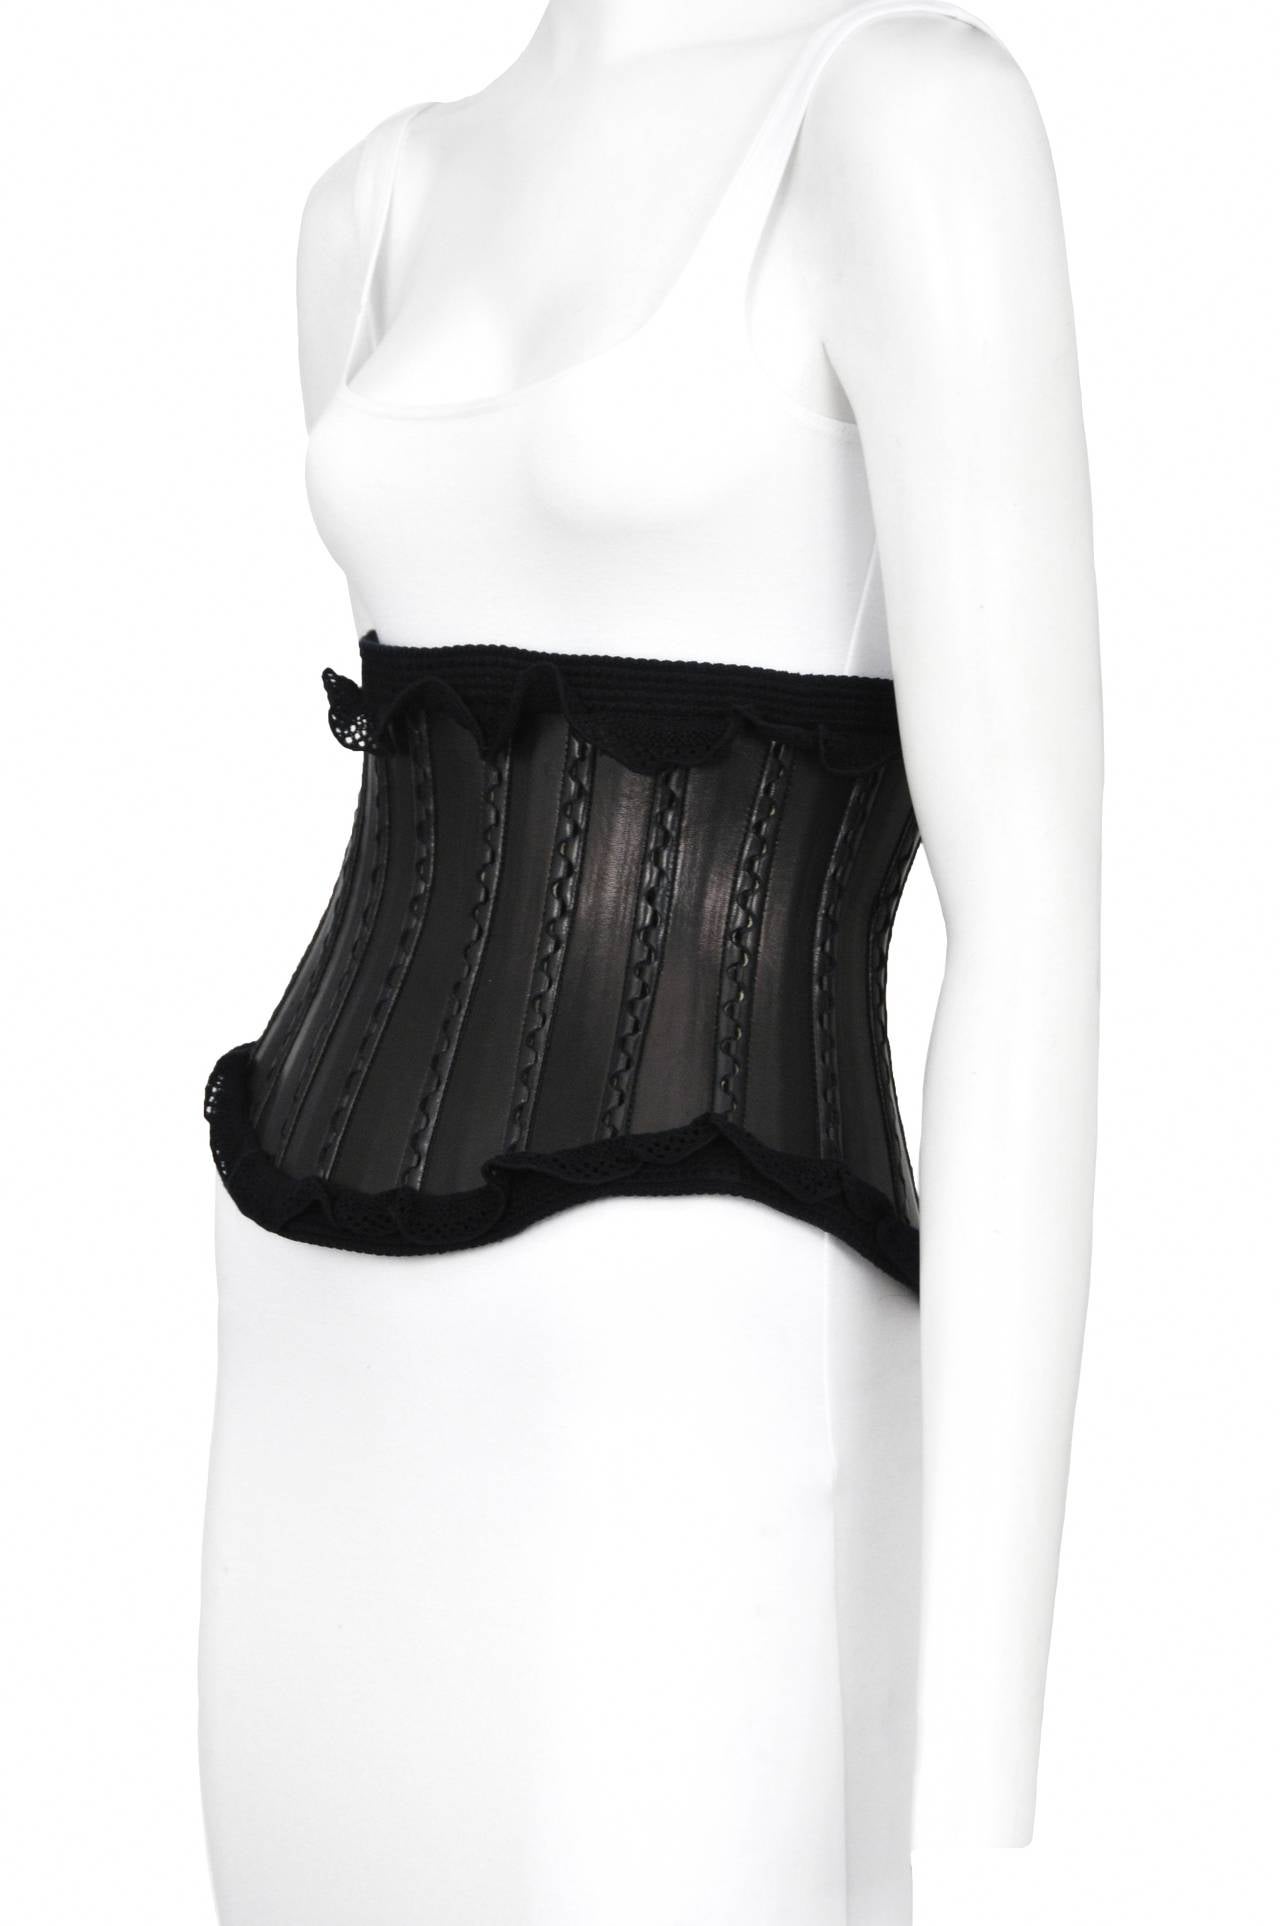 Vintage Azzedine Alaia black leather corset with ruffle detailing along the edges.